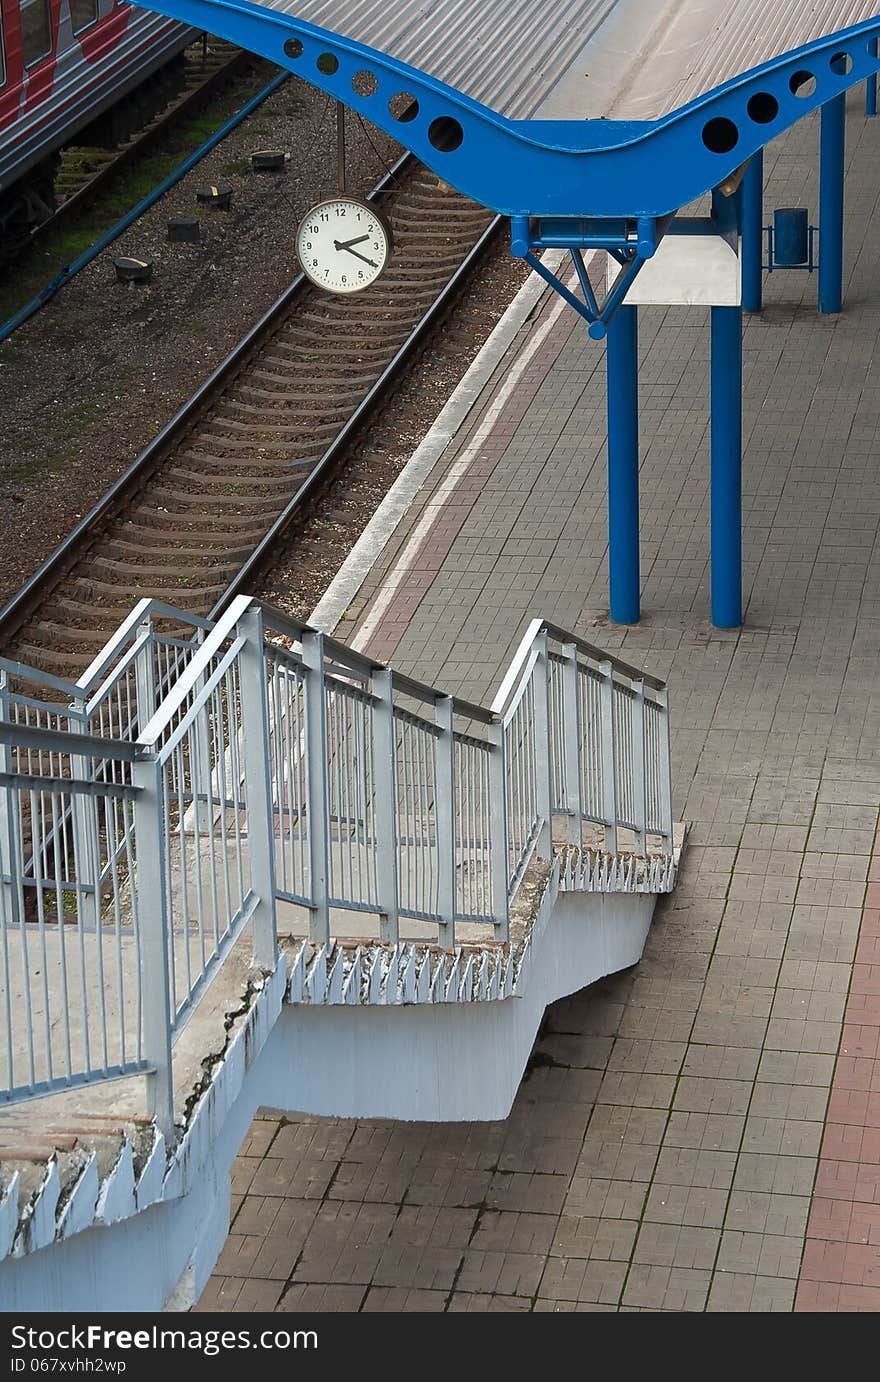 Railway platform and clock at the railway station without passengers and trains. Urban landscape - perspective way on a railroad with stairway.